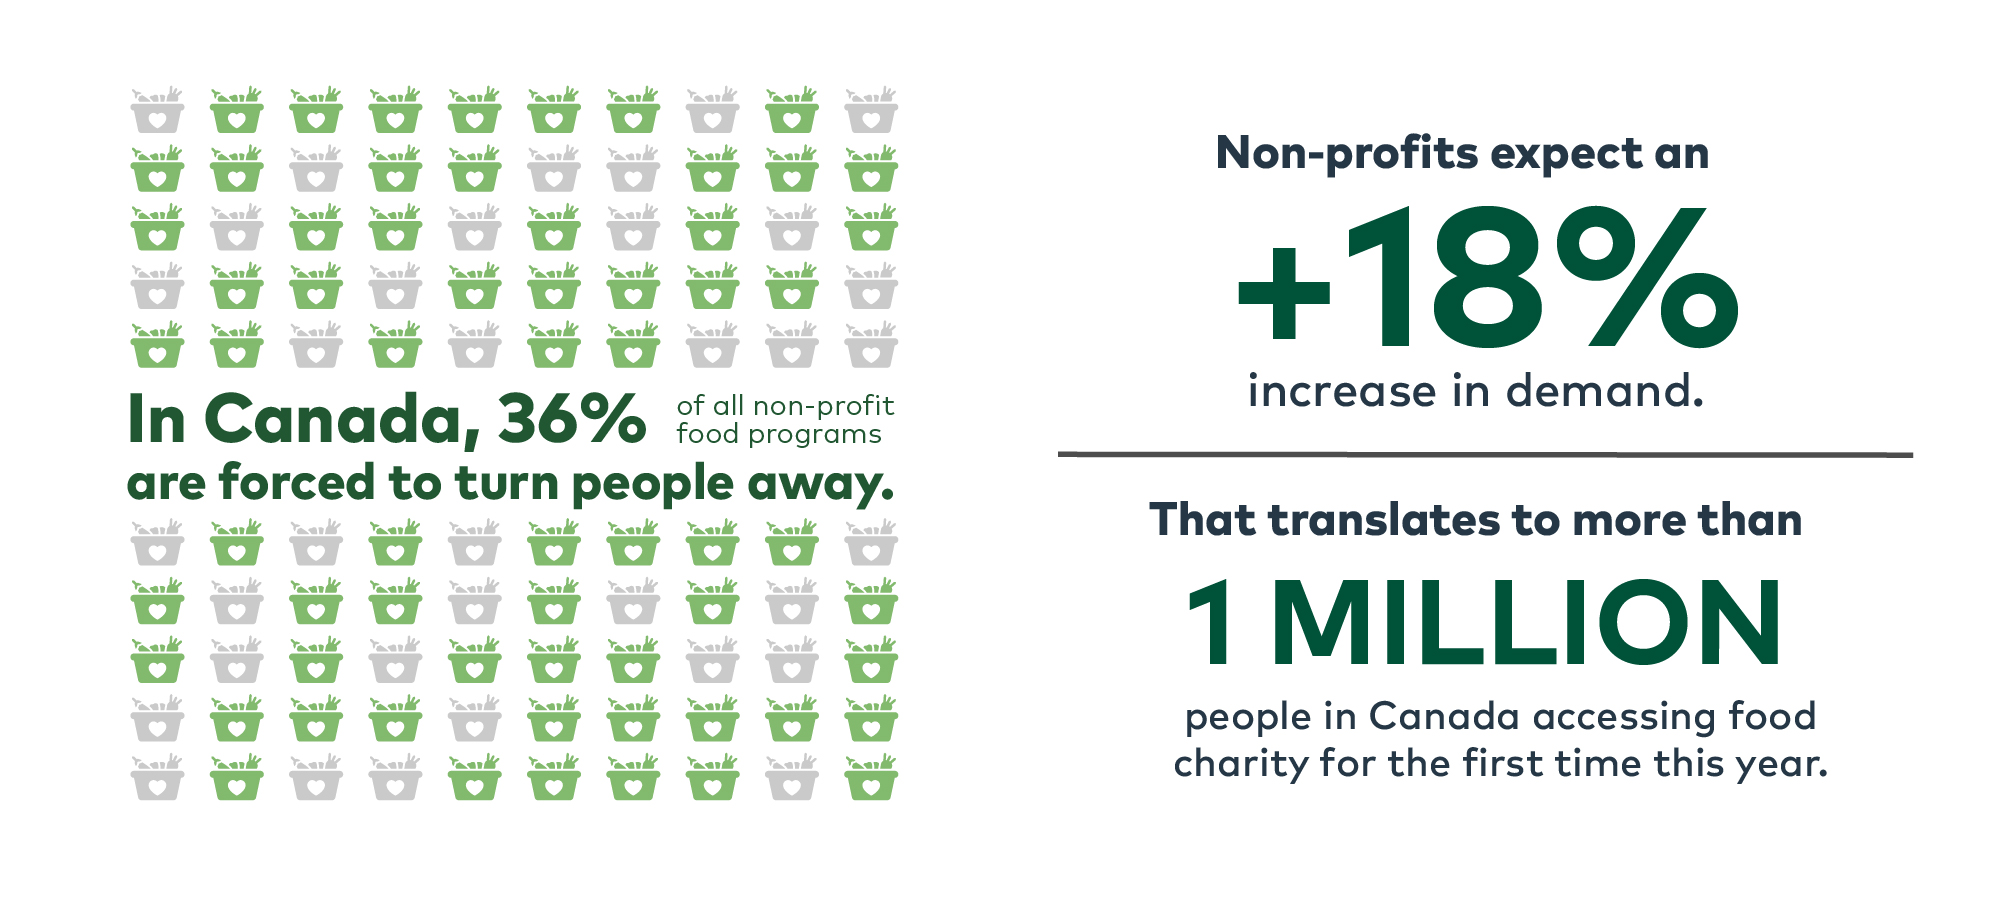 In Canada, 36% of all non-profit programs are forced to turn people away. Following three years of significant increases in demand for food from charities, many programs are operating past their limits and expecting an additional 18% increase in 2024. In Toronto the anticipated increase is 30%.